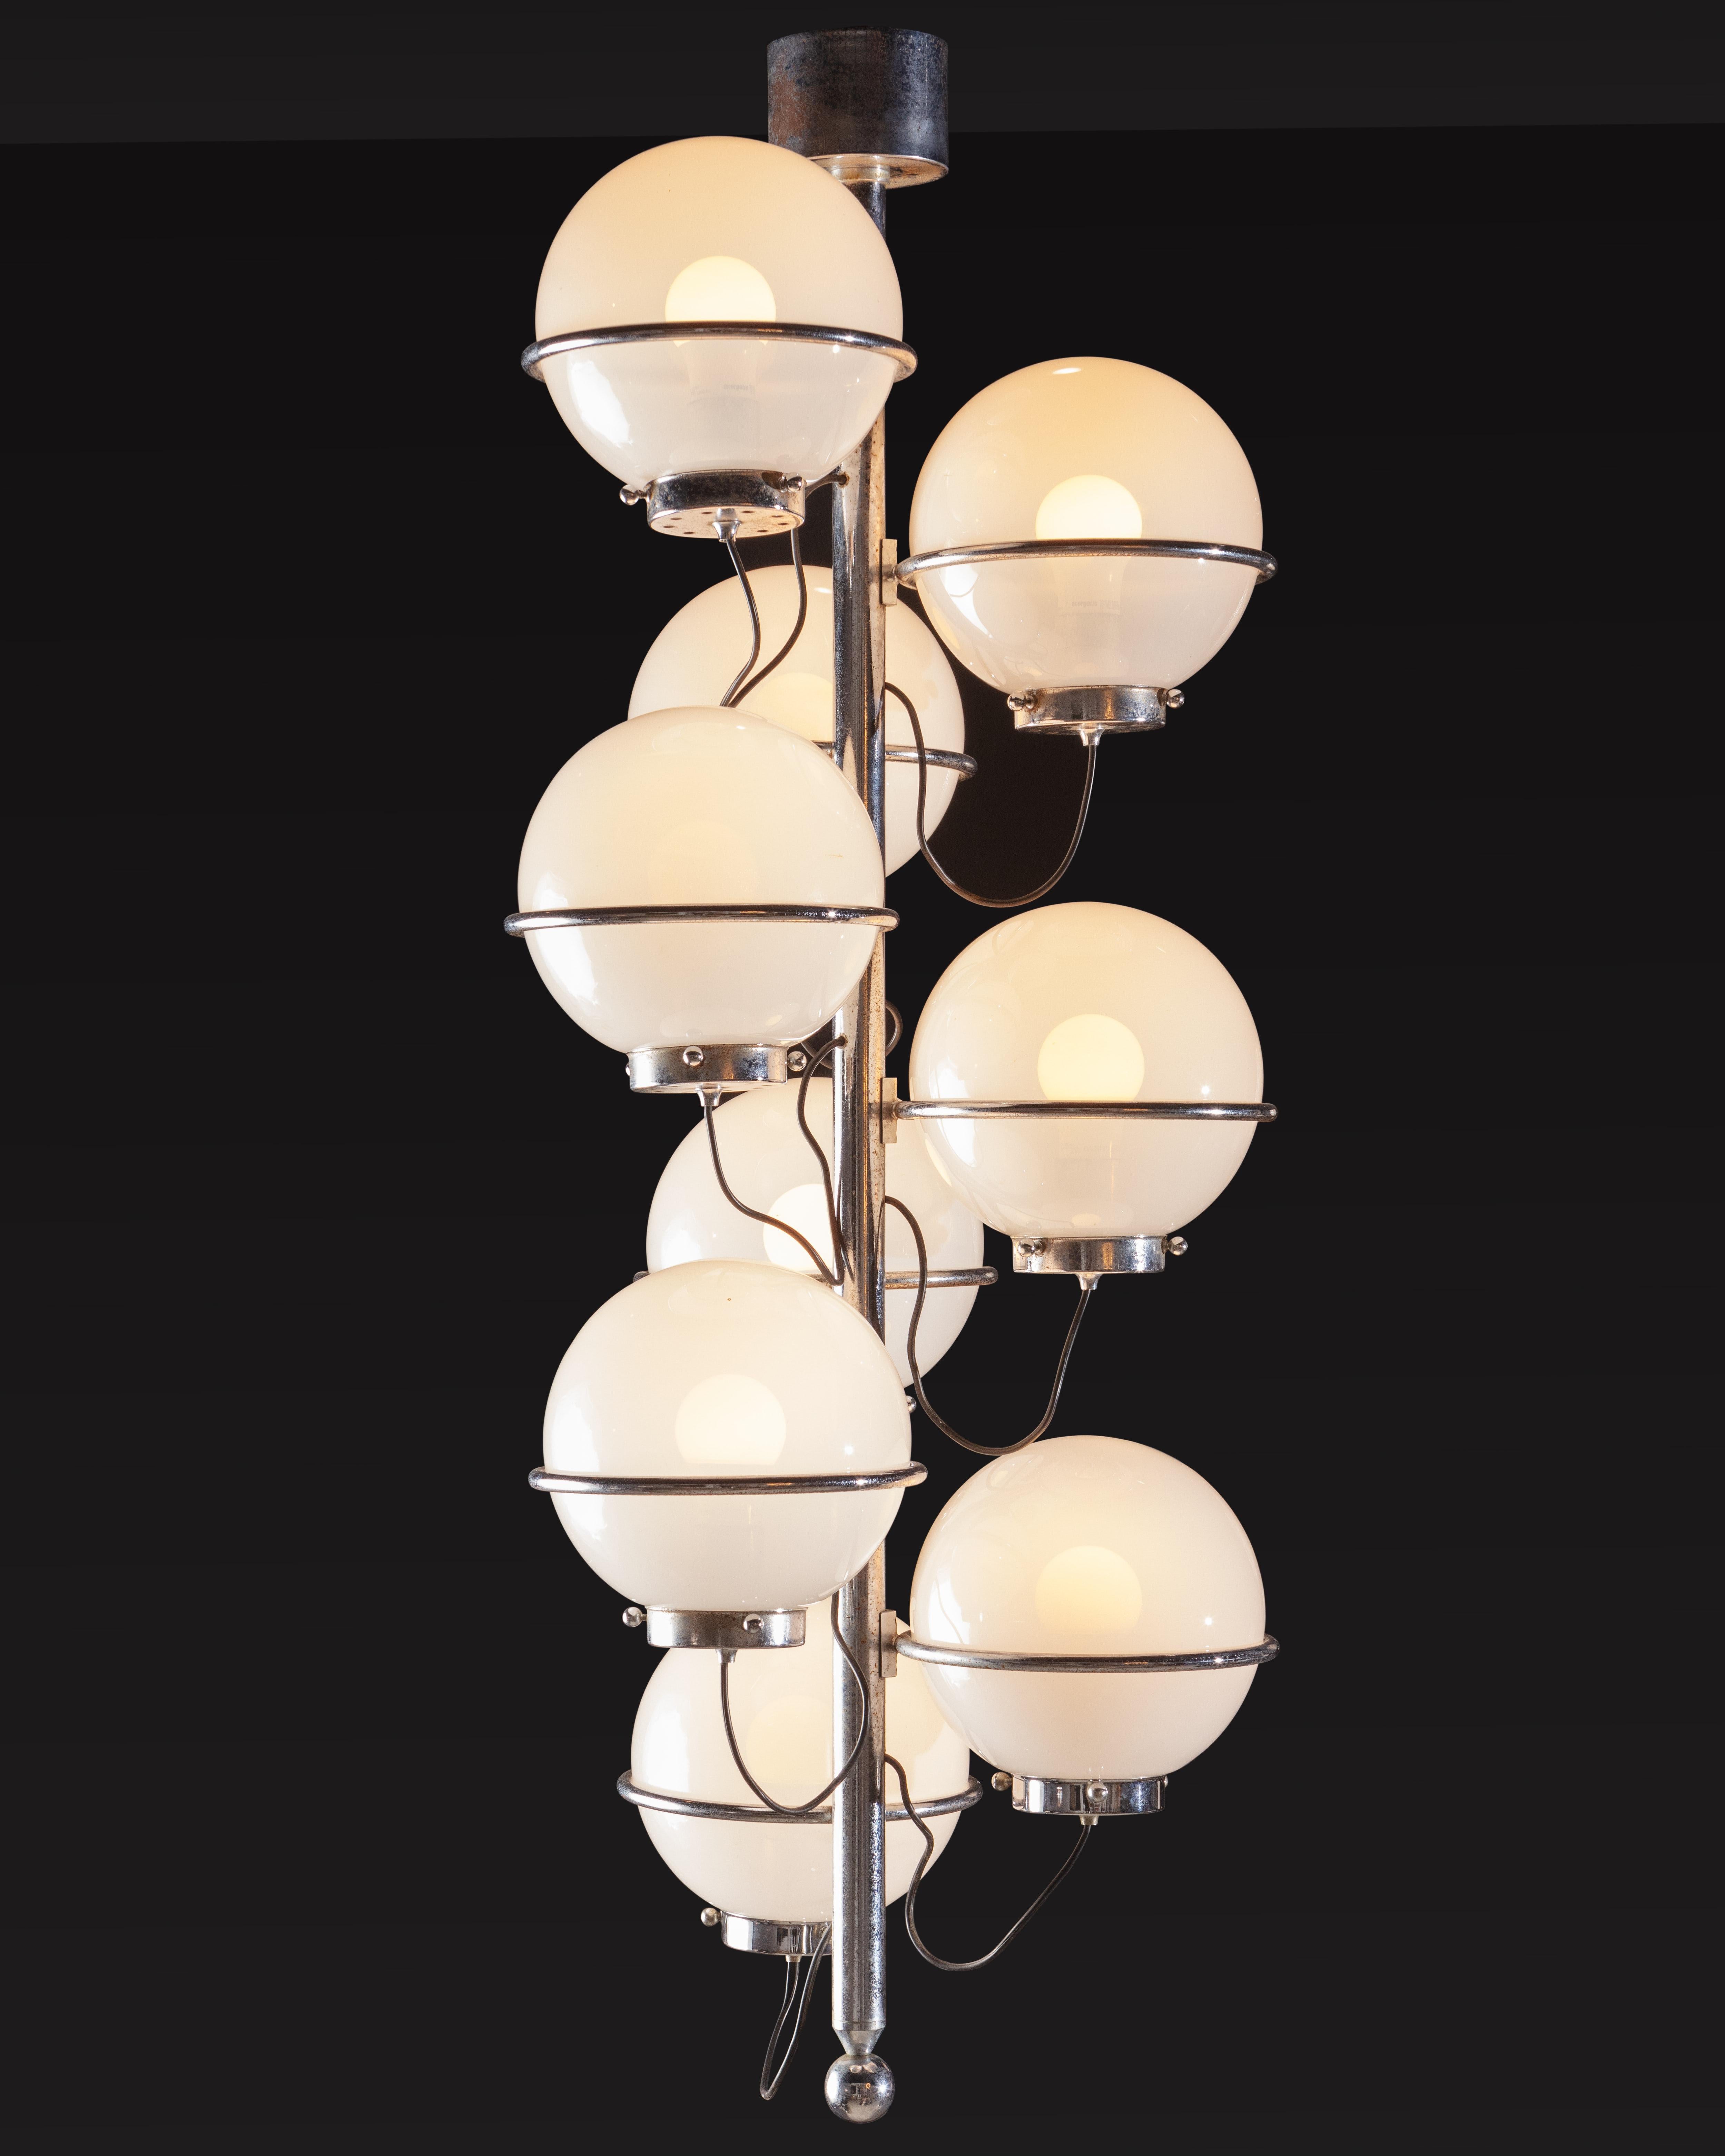 Midcentury Italian chrome light fixture in the style of Gino Sarfatti. Featuring 8 hand blown glass globes in an opaque white suspended in a chrome ring frame with exposed black wiring gathered into the central part of the chrome frame.